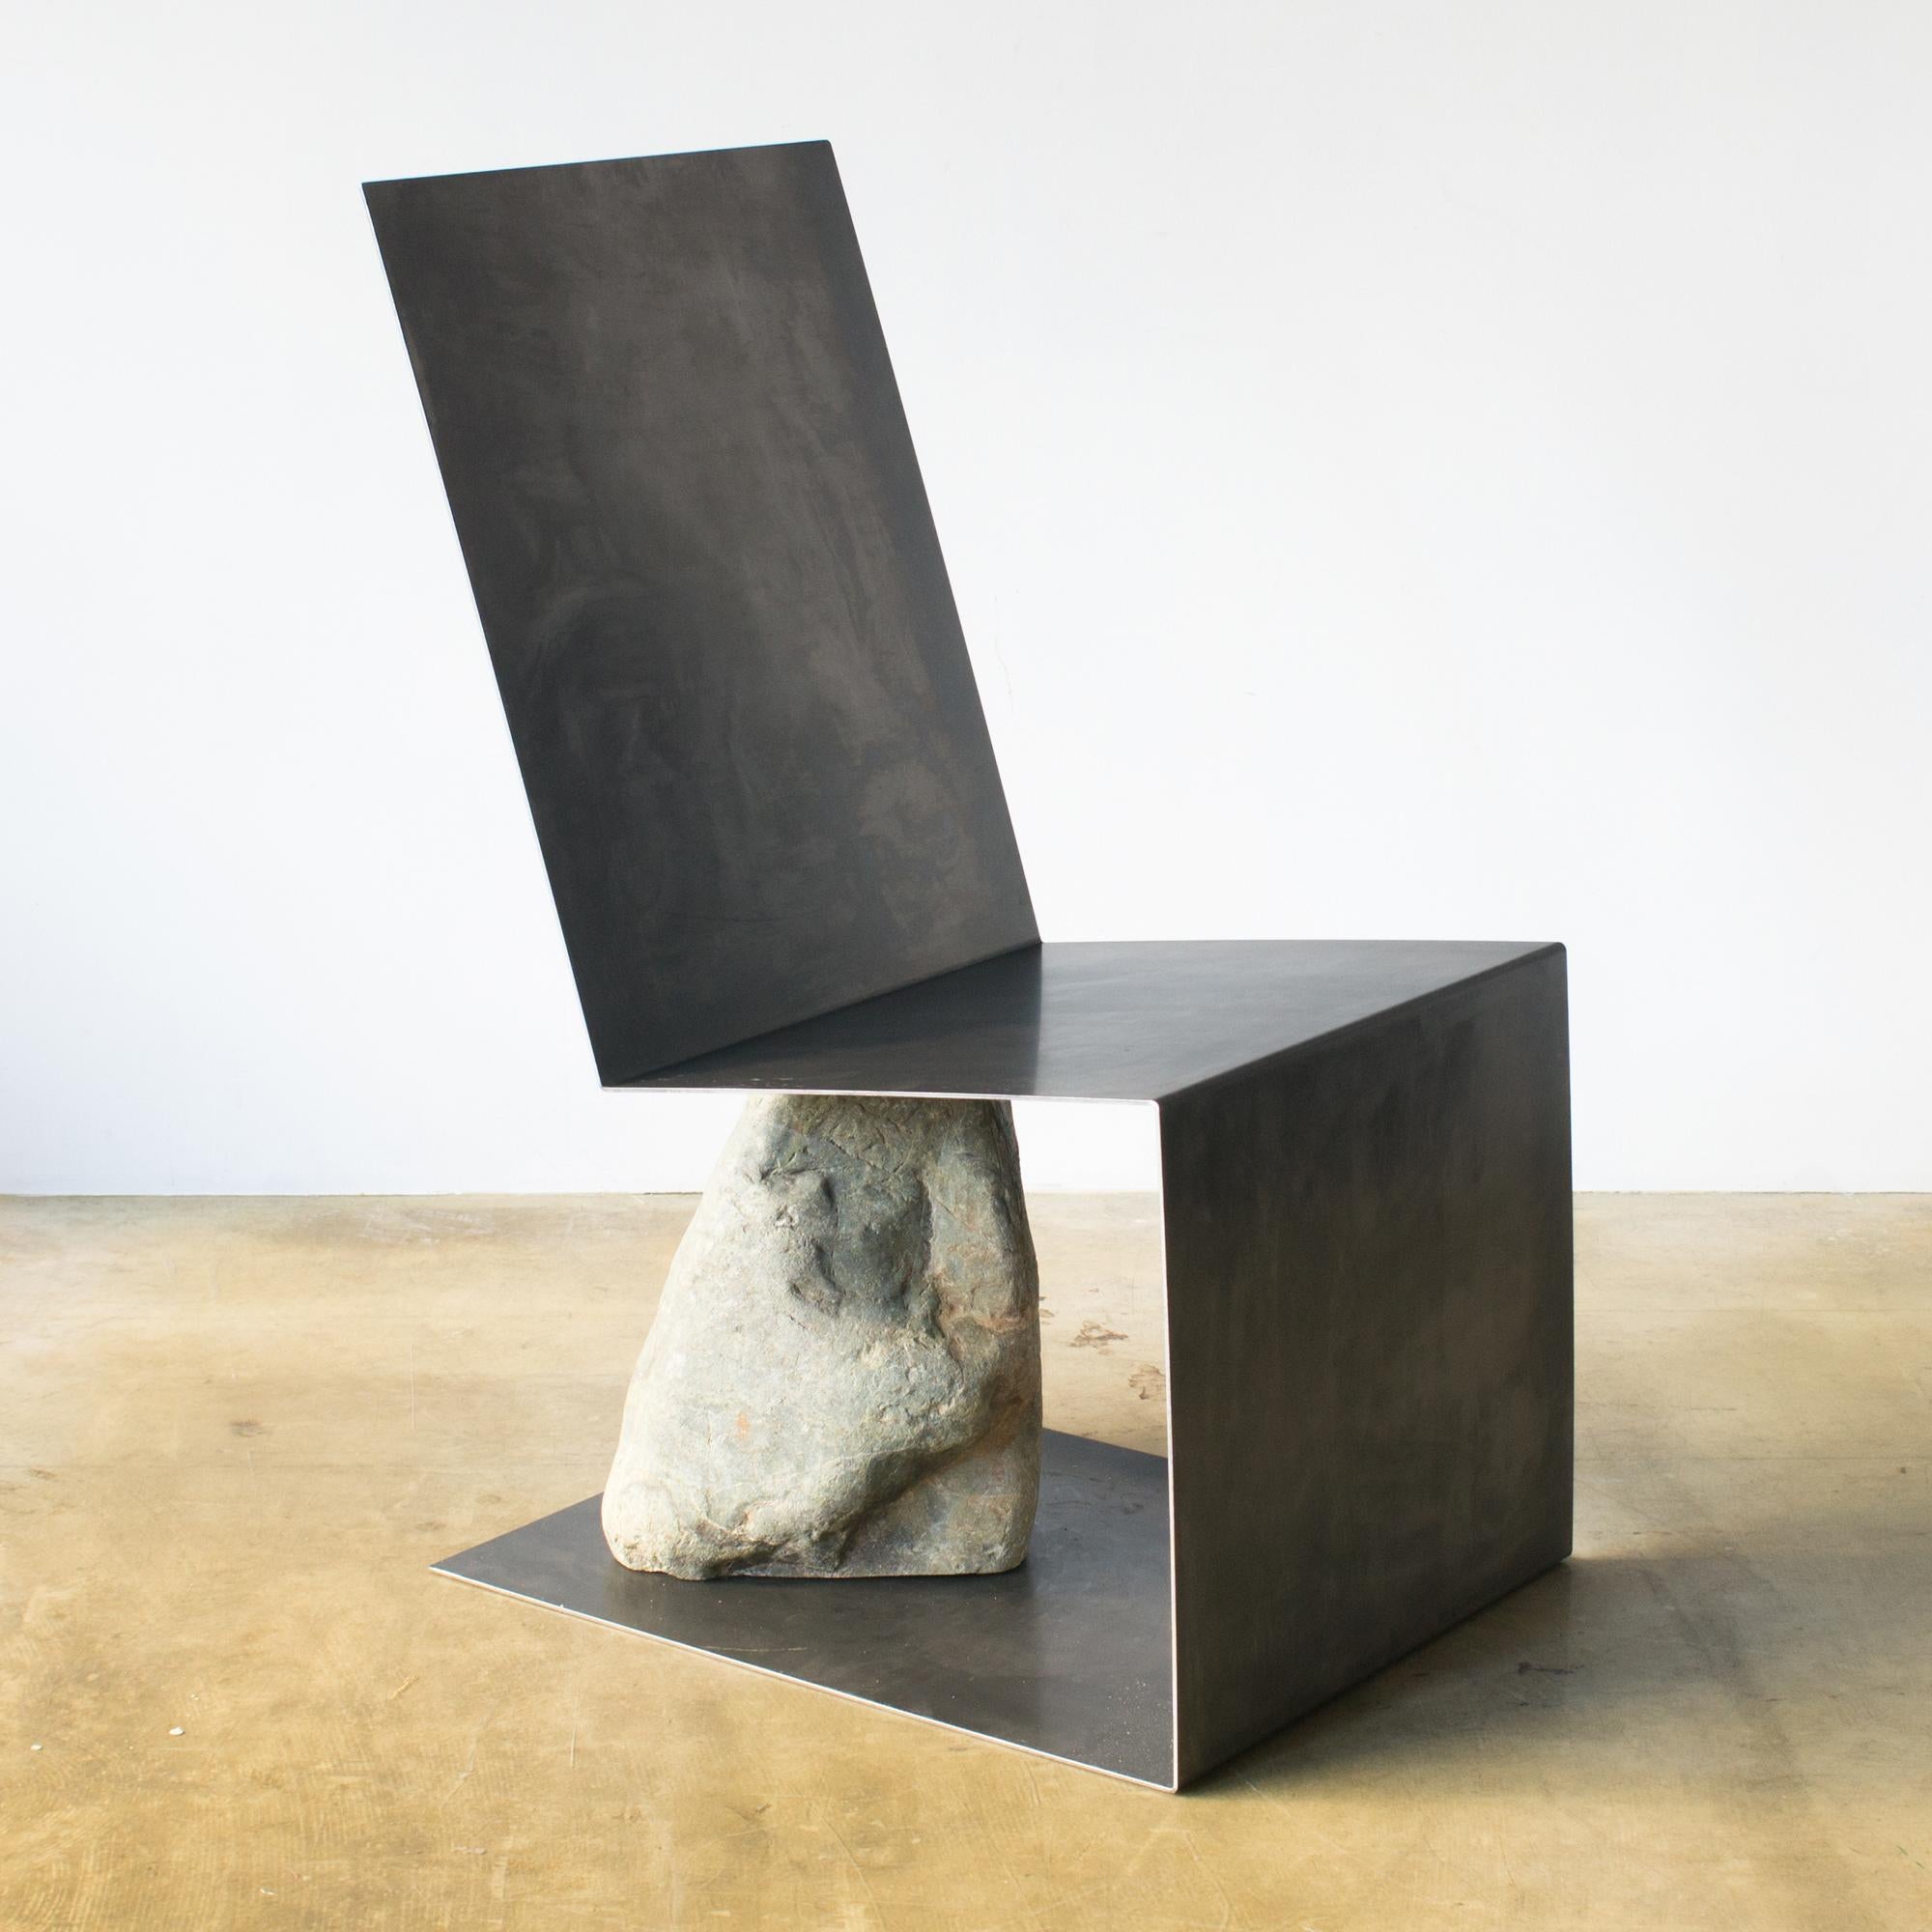 Chair designed by Batten and Kamp.
Minimal structure furniture made of steel and natural stone.
   